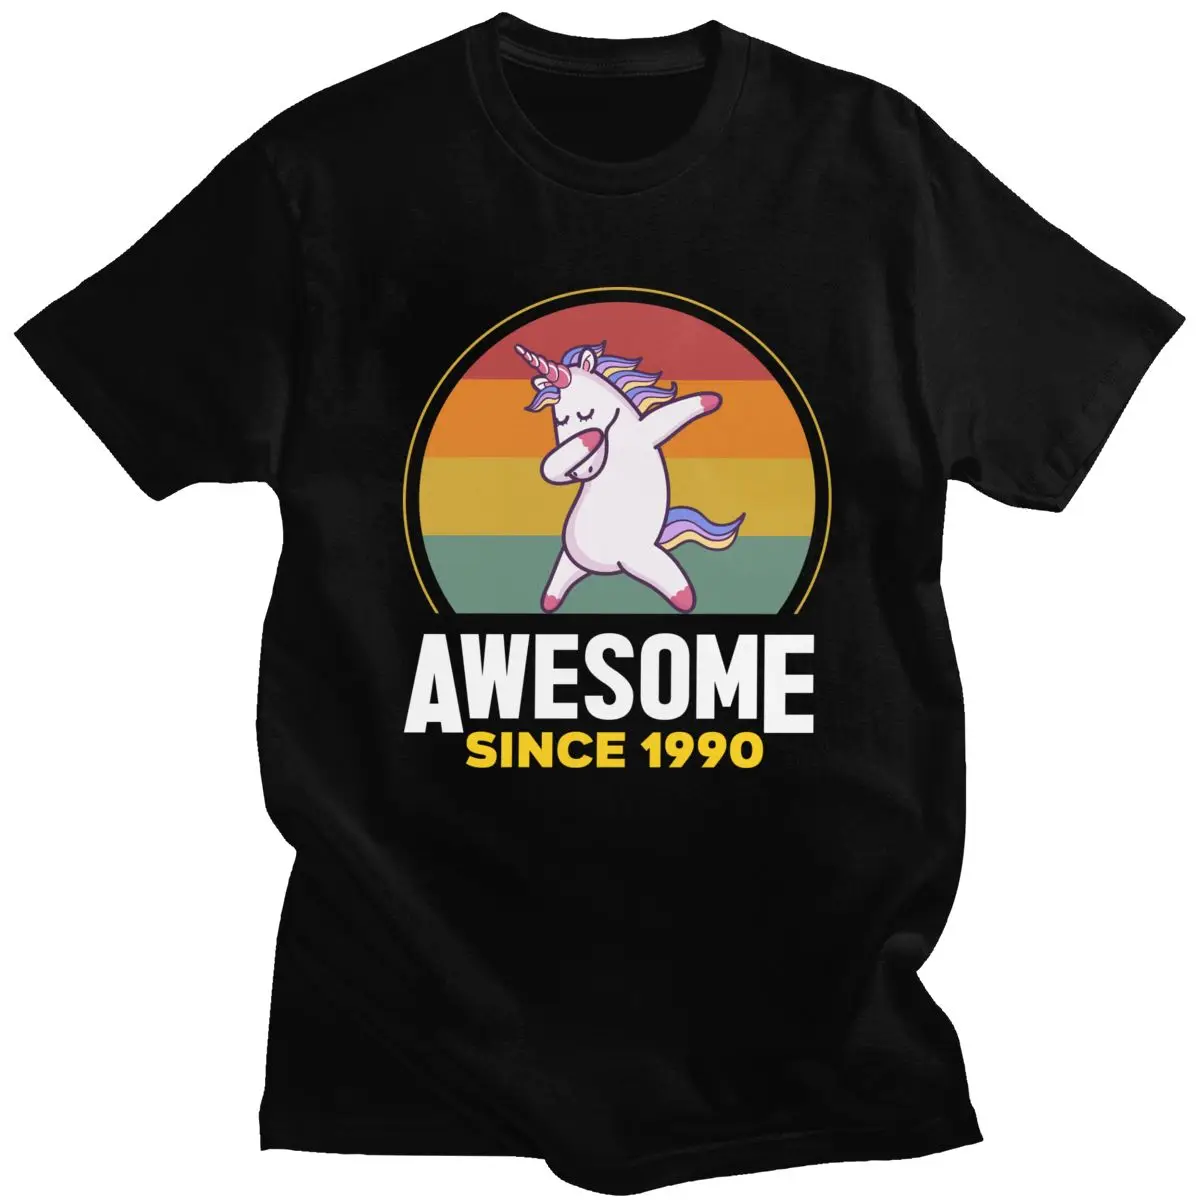 

Awesome Since 1990 T Shirt for Men Soft Cotton Awesome T-shirt Short Sleeved Born In 1990 30th Birthday Tee Tops Clothing Gift